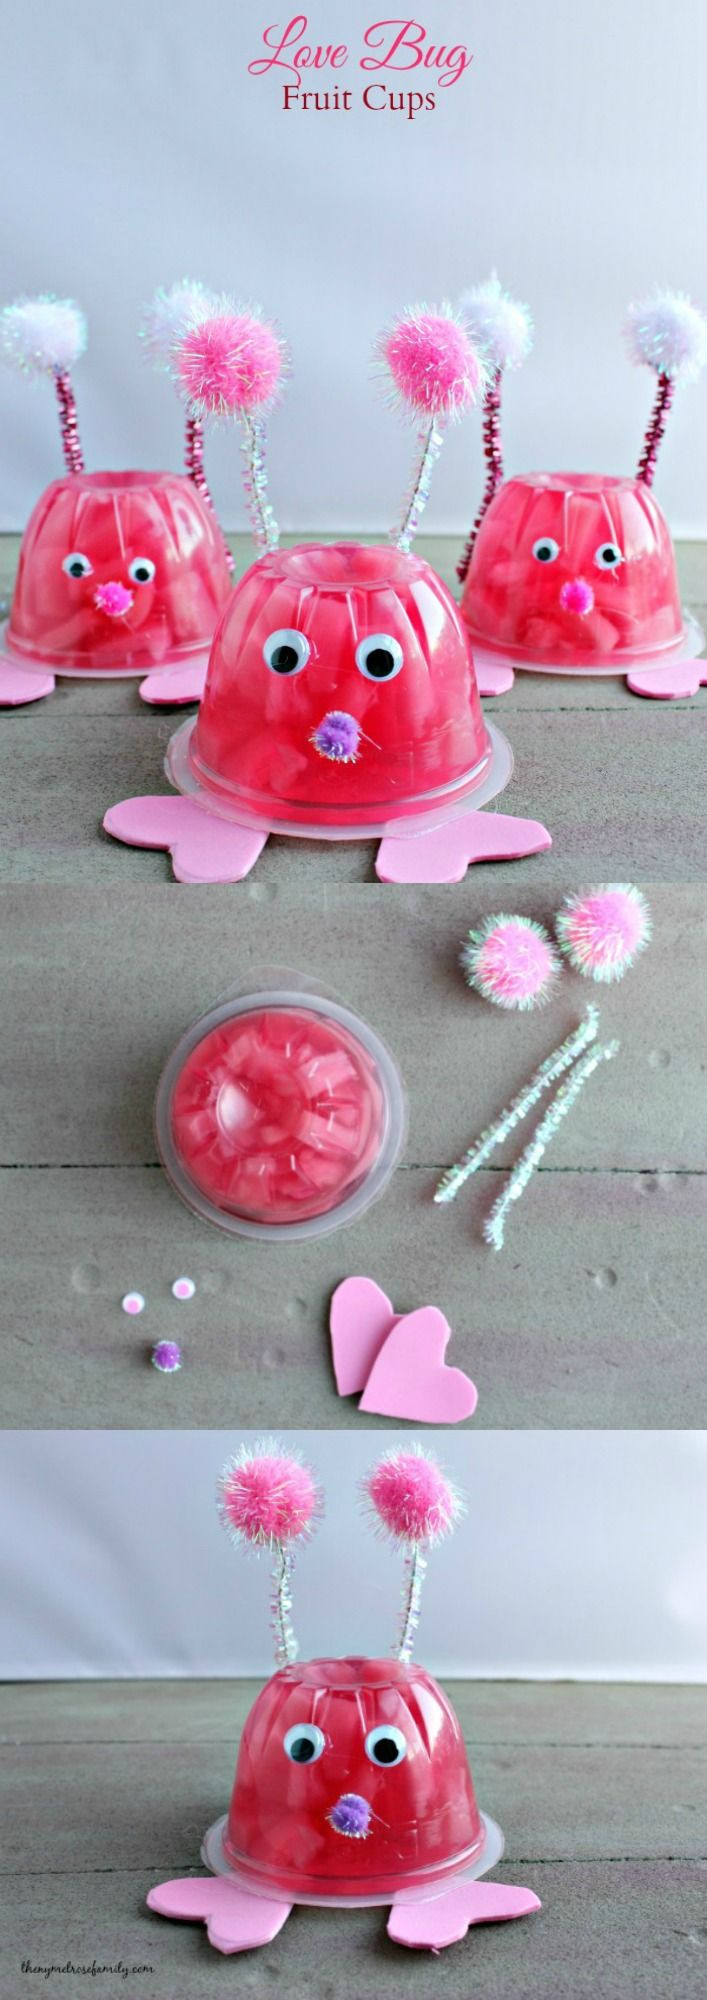 Valentine Class Gift Ideas
 Valentines Day Ideas for Kids Love Bug Fruit Cups